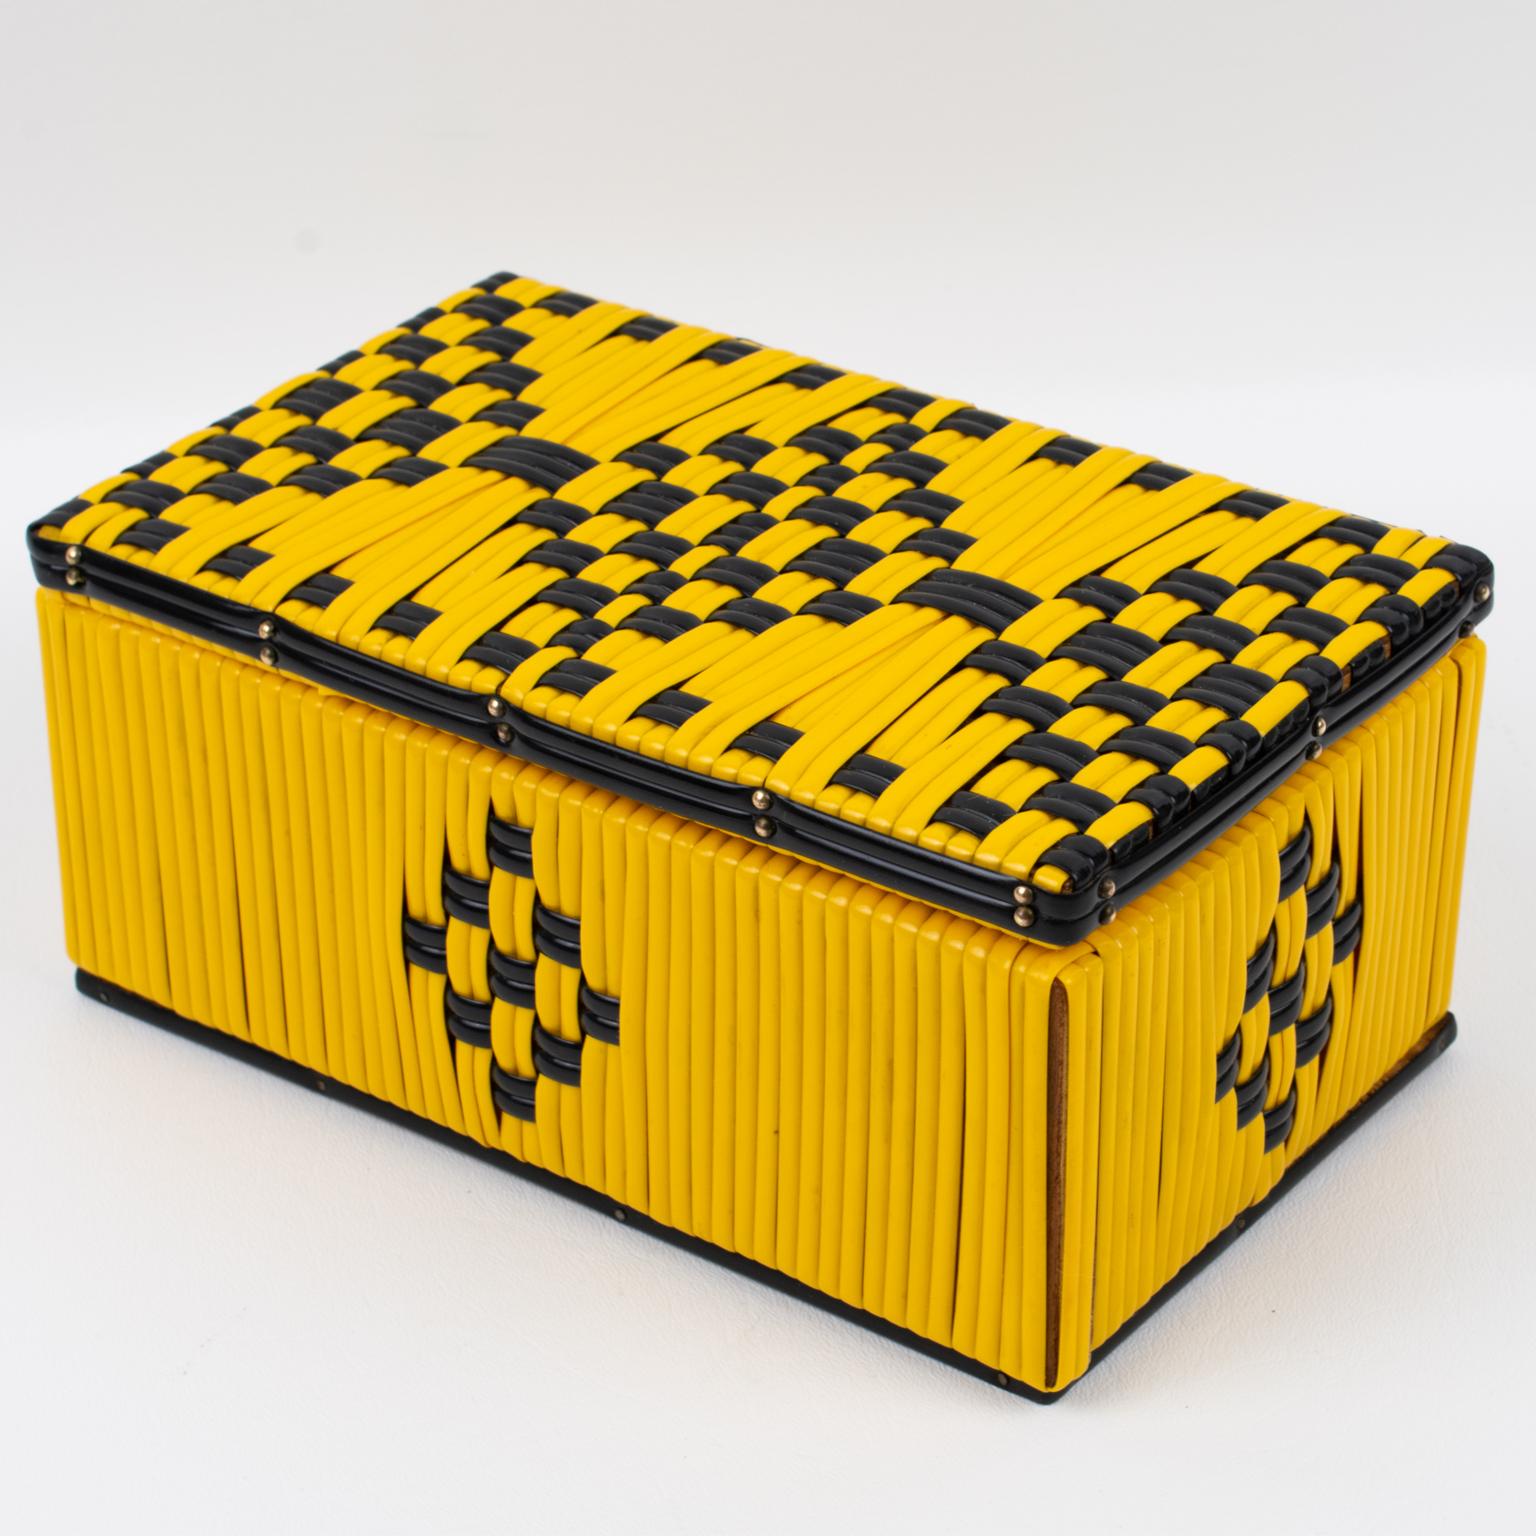 This lovely 1950s French decorative lidded box features a bright yellow vinyl plastic scooby or craft lace (in French scoubidou) with black contrast thread. The box boasts a stunning geometric design on all faces. There is no visible maker's